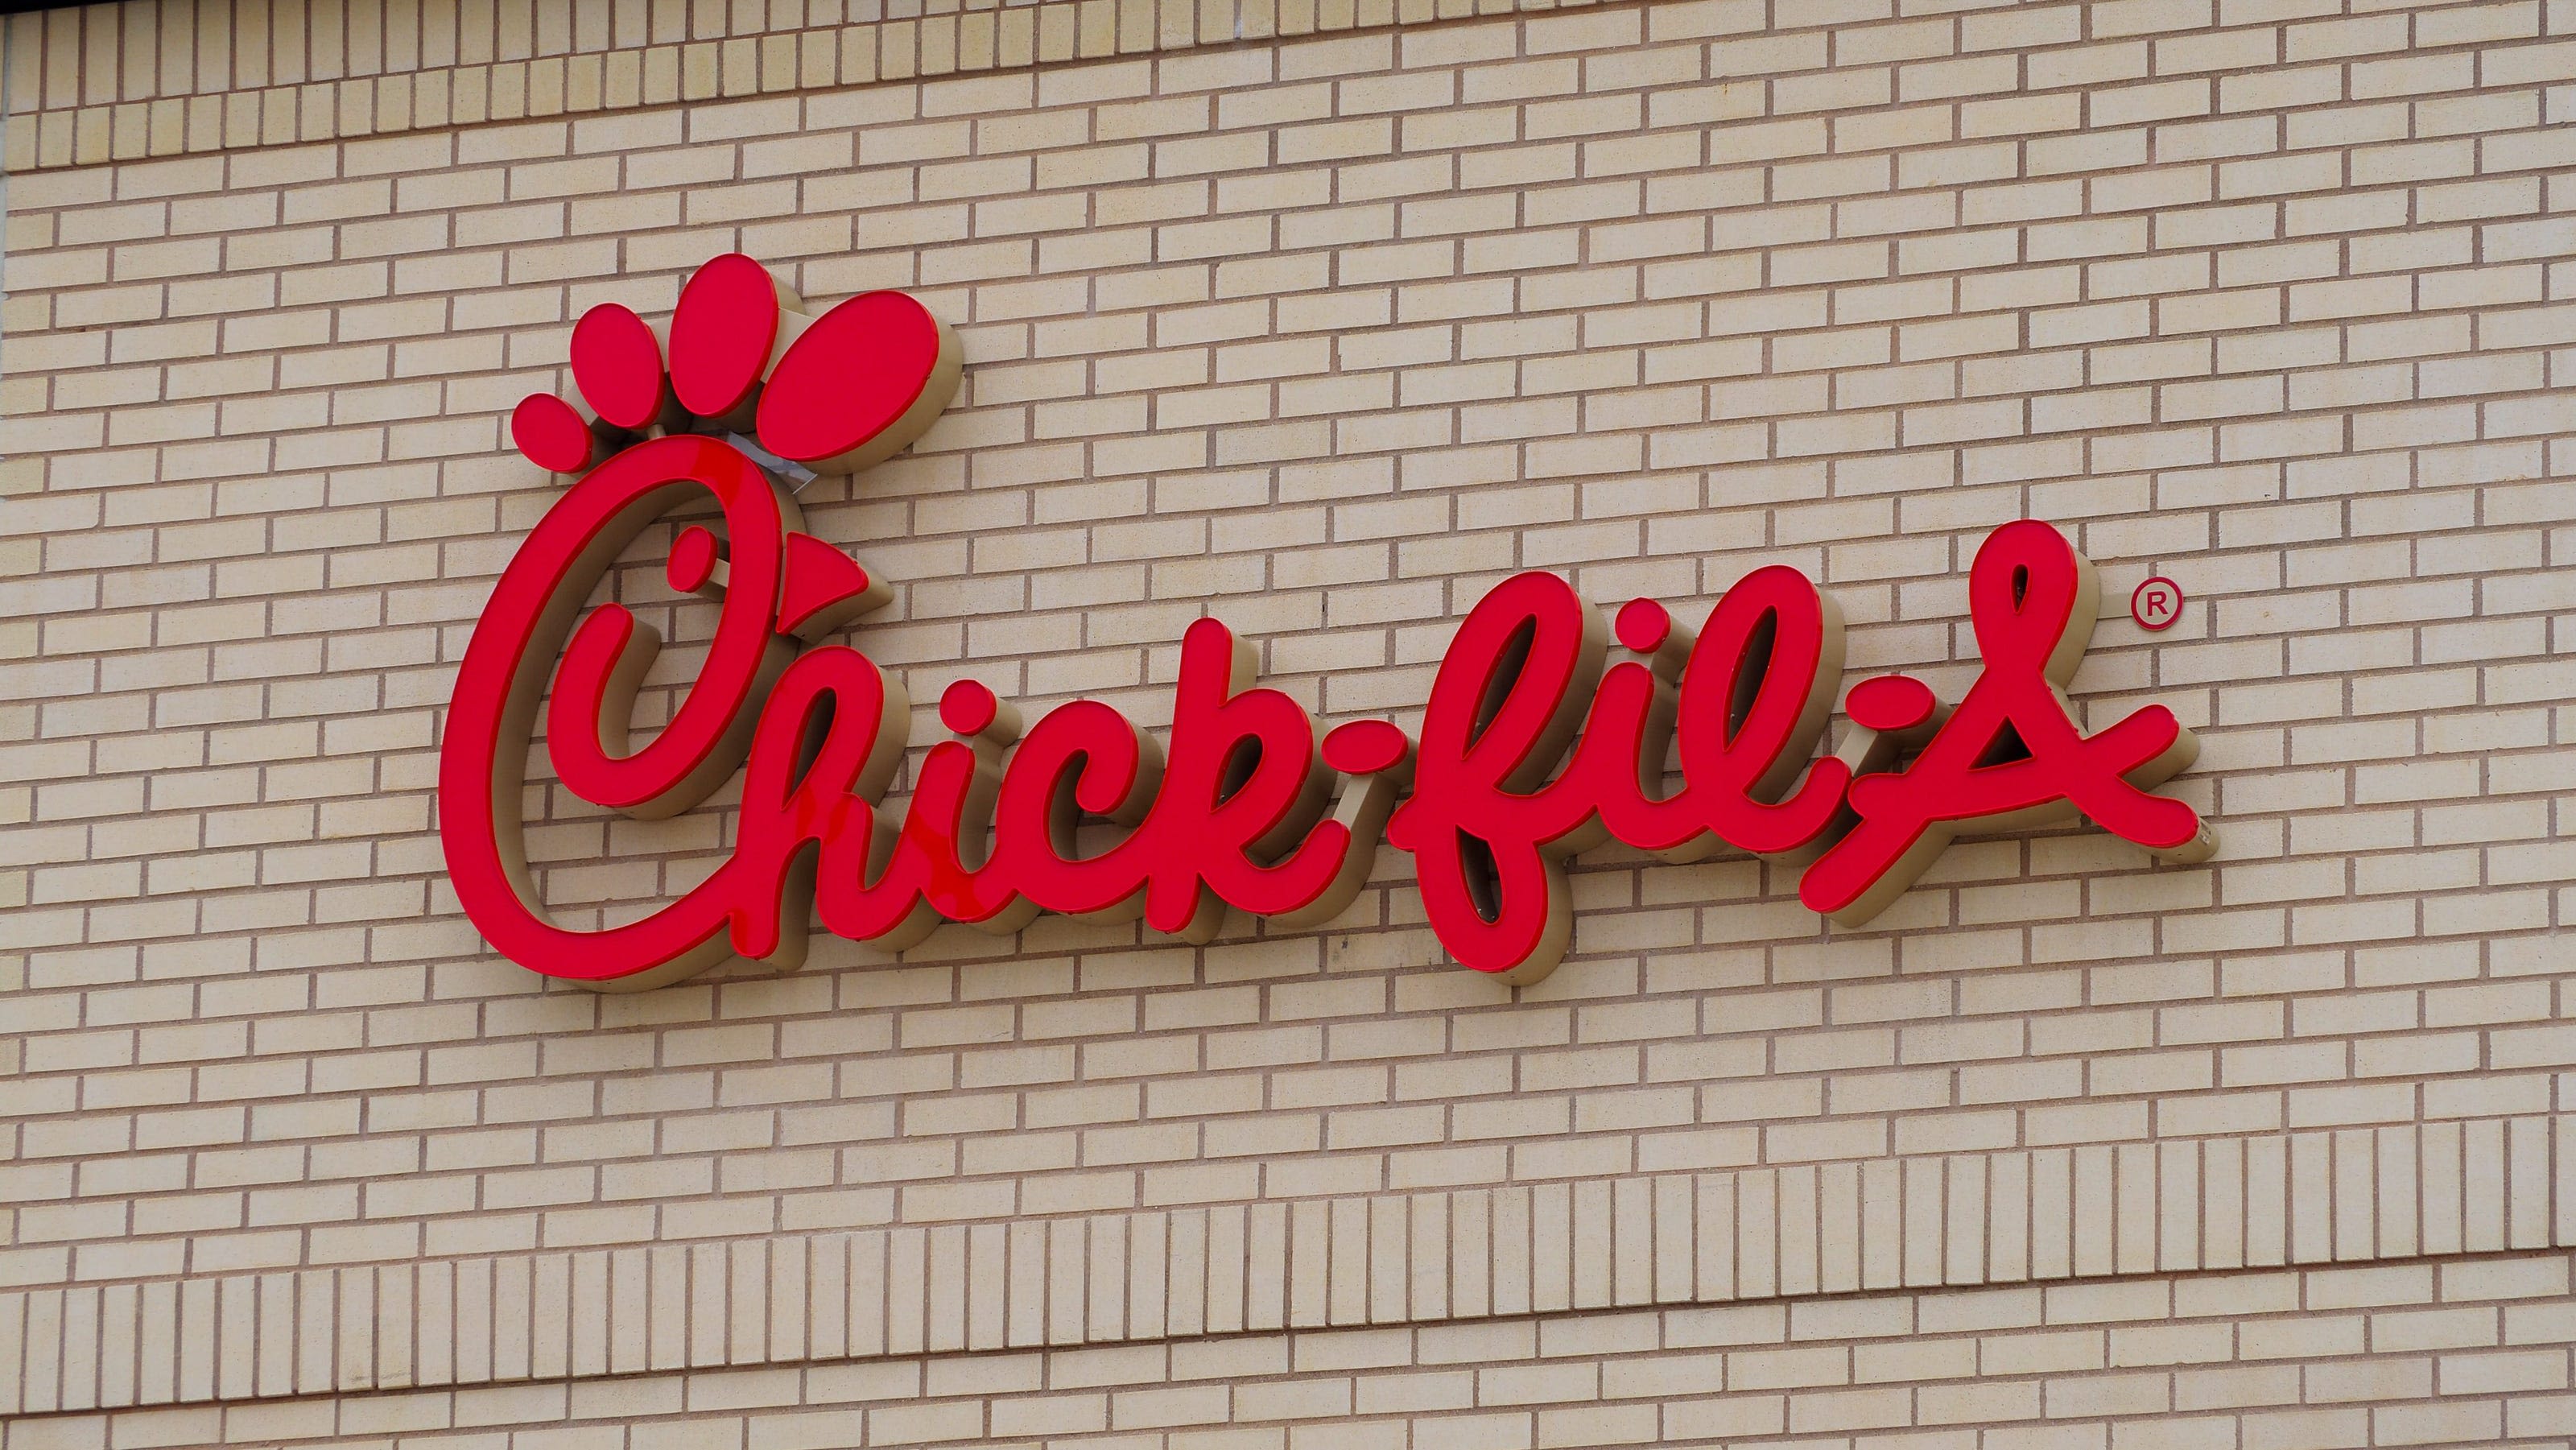 Is Chick-fil-A coming to Hillsborough?